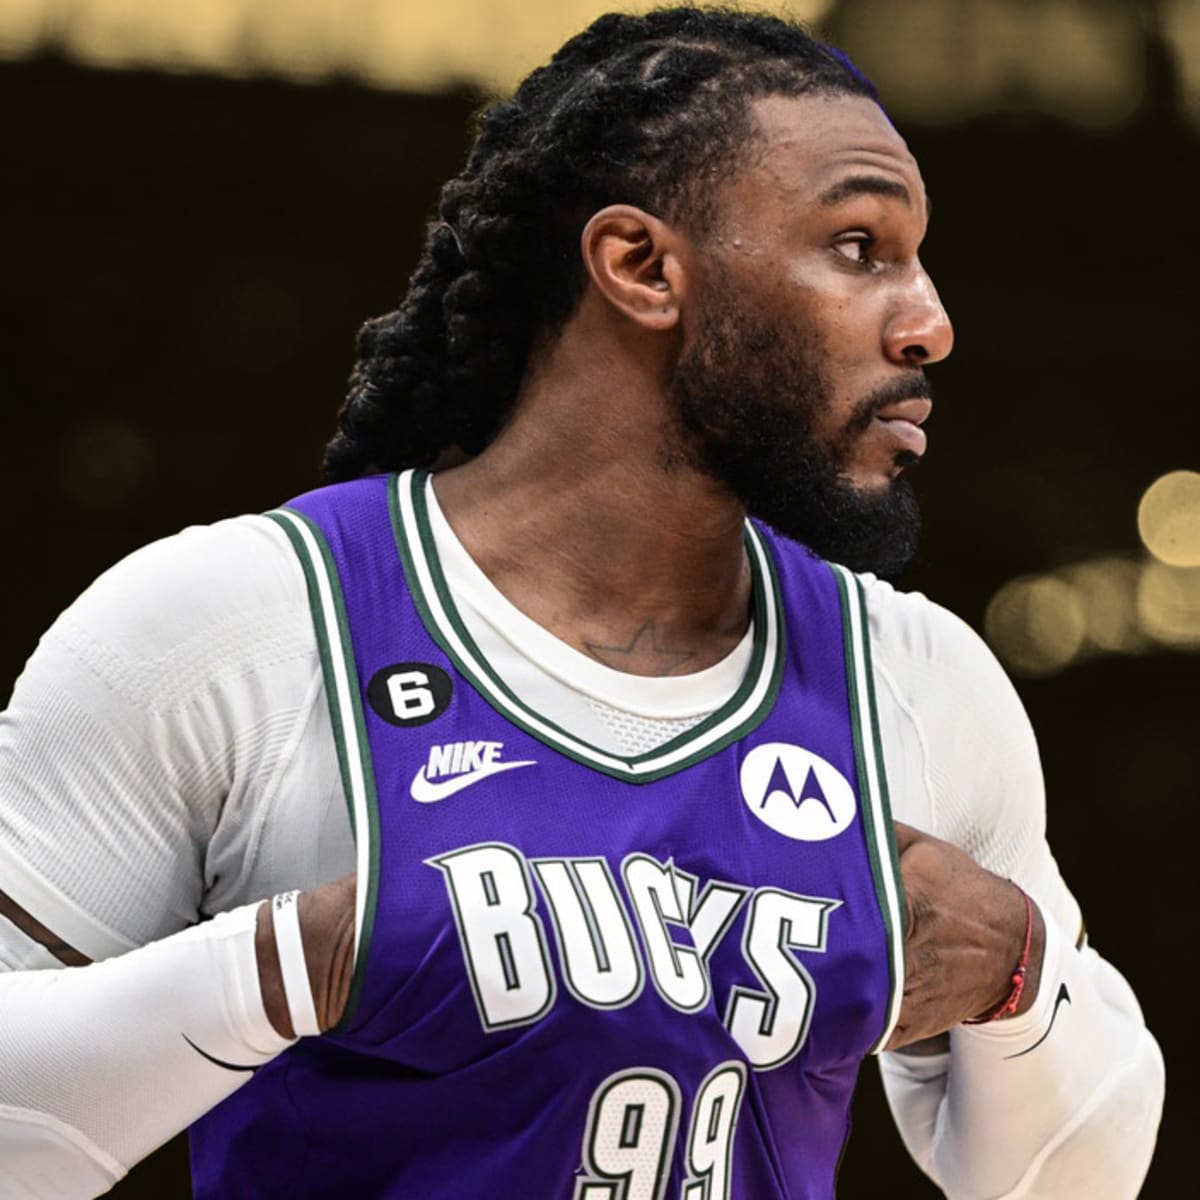 Jae Crowder trade rumors: Jae Crowder is gaining interest from Hornets,  Nuggets, Wizards, Timberwolves and Knicks